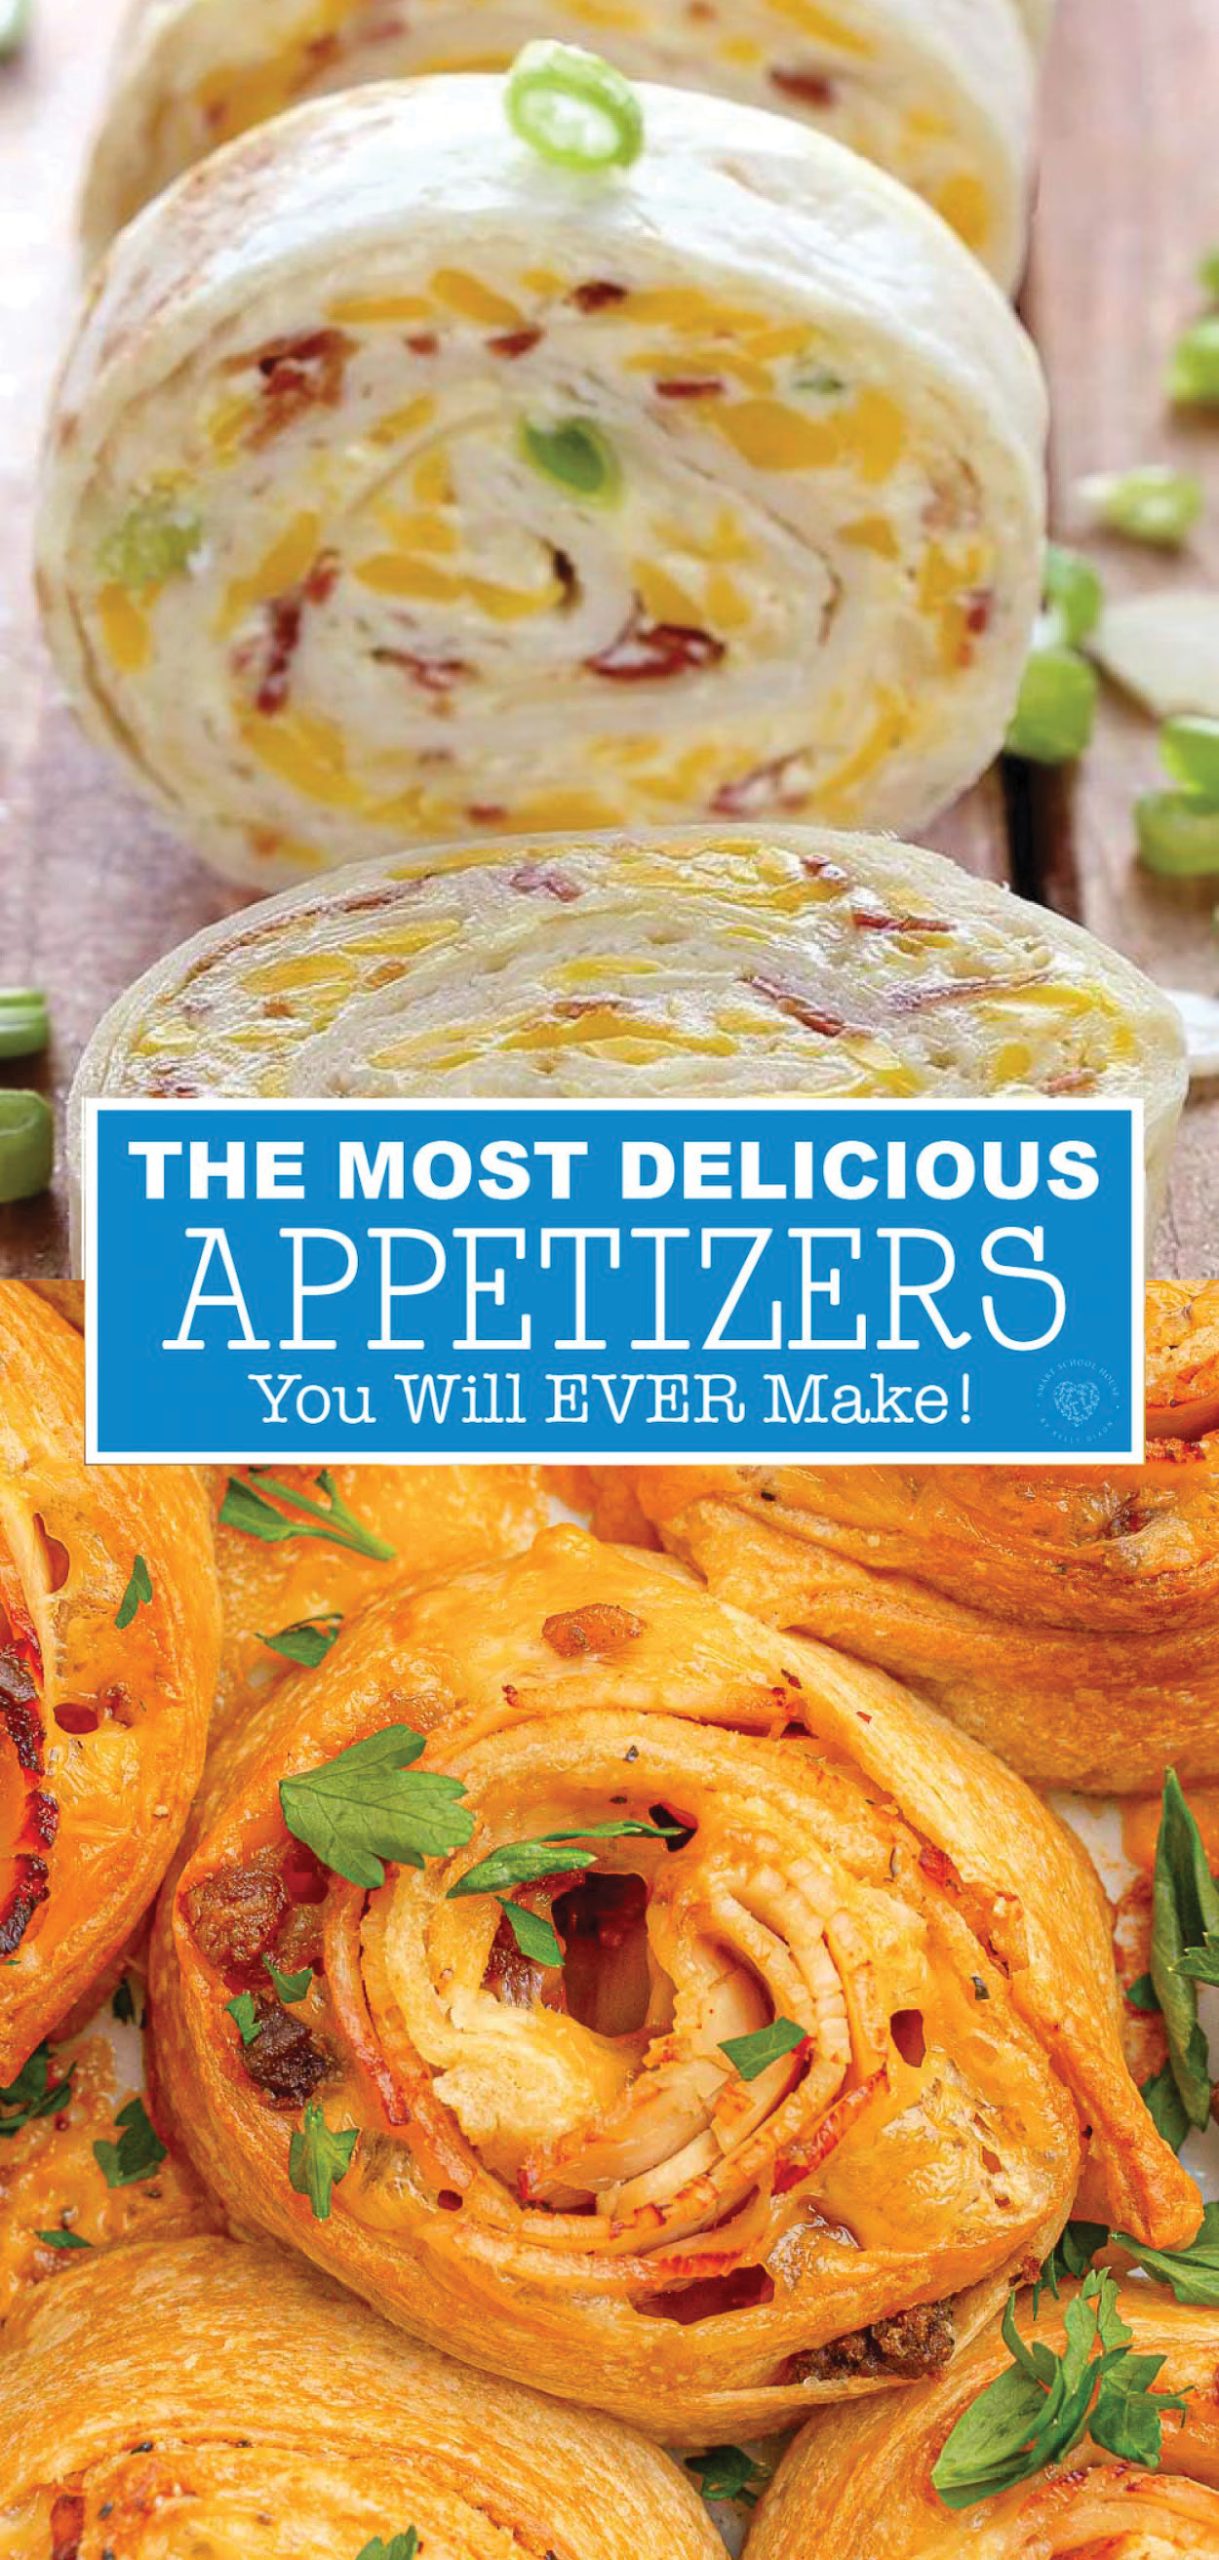 31 of the Most DELICIOUS Appetizers You Will Ever Make! Crowd pleasing bite sized finger food everyone loves.